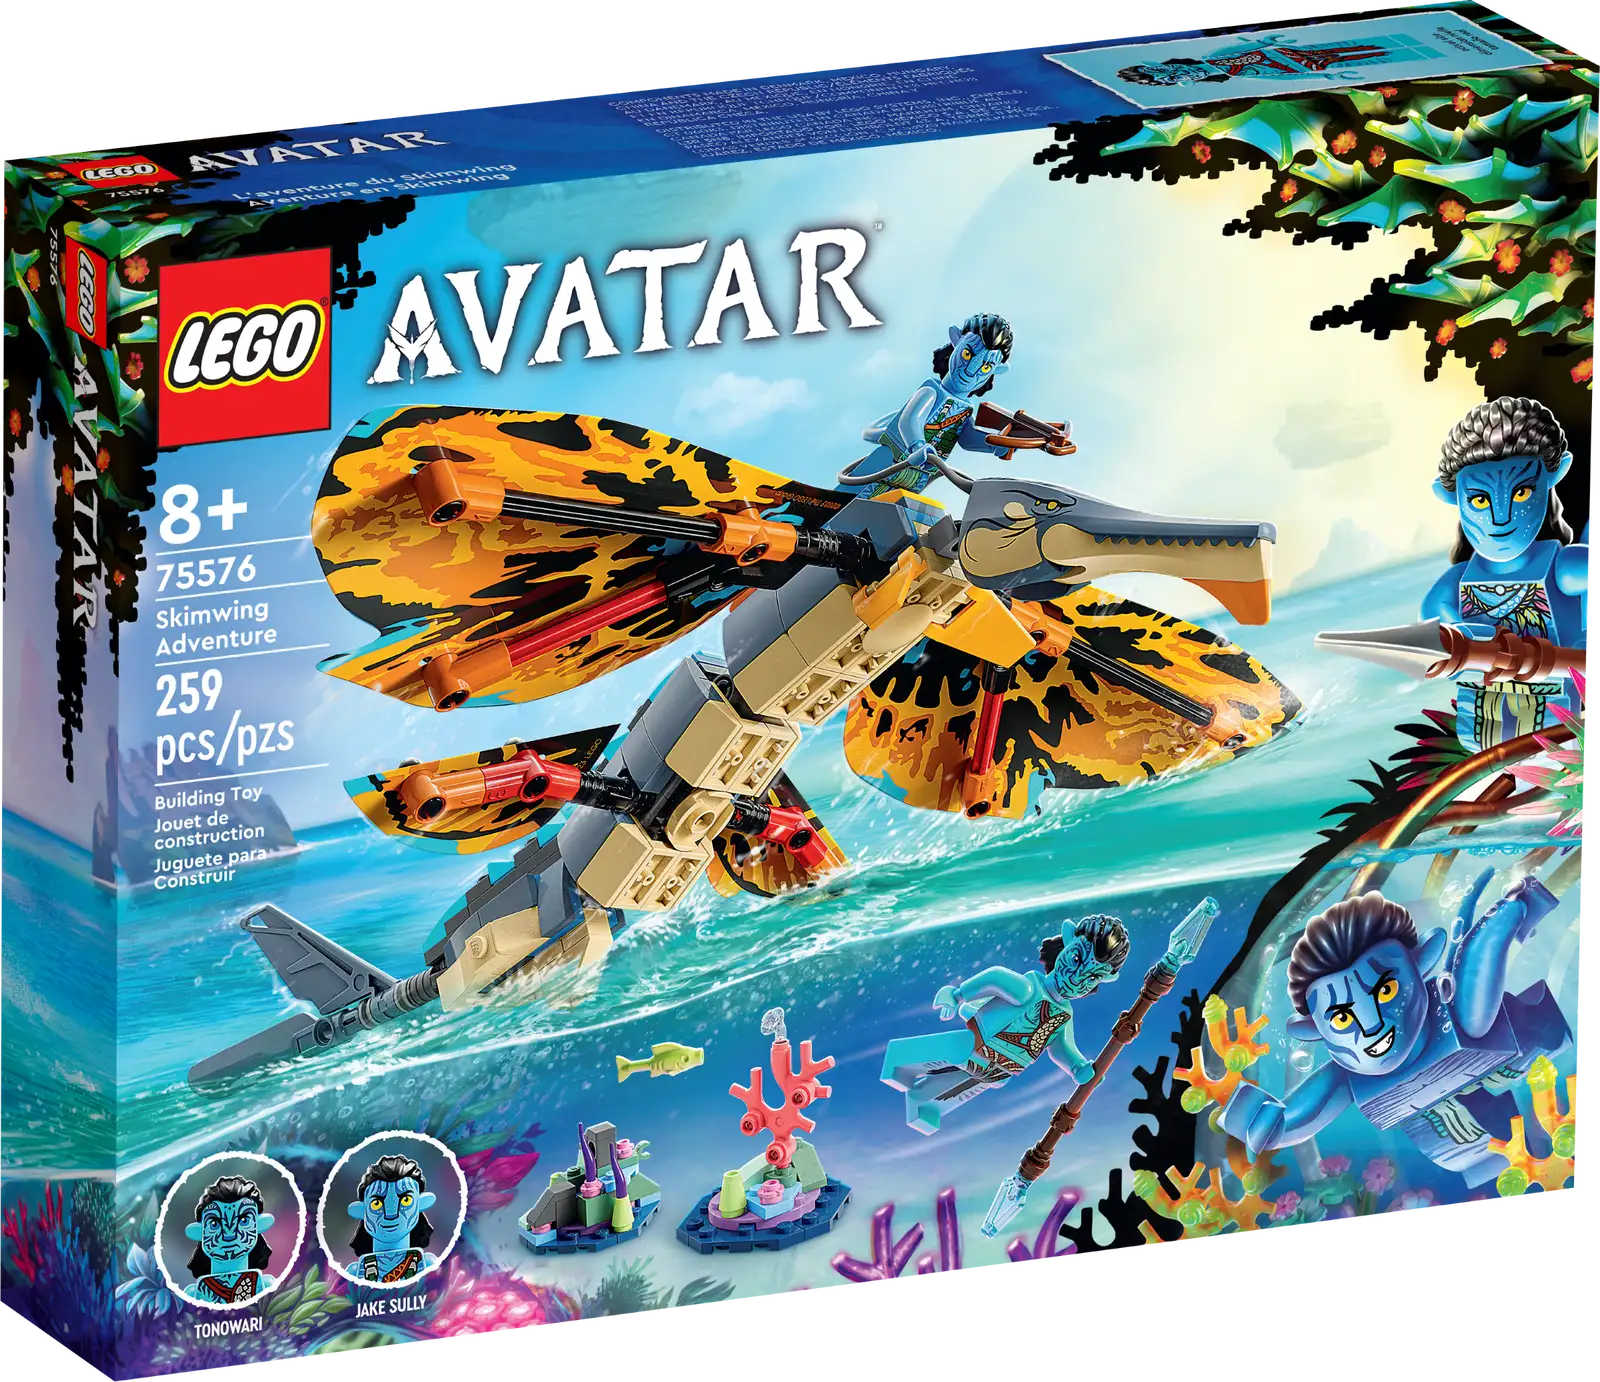 Avatar fans will adore this 8+ LEGO® Avatar Skimwing Adventure (75576) set. Kids and moviegoers can relive favorite movie moments or create their own scenes and storylines with the posable skimwing figure, Tonowari and Jake Sully minifigures and alien coral reef setting. Fun to build This collectible toy building set includes an easy-to-follow pictorial building guide and the LEGO Builder app – a digital mentor with intuitive zoom and rotate tools that enable you to visualize models from all angles as you build. Great for play and display LEGO Avatar sets feature iconic vehicles, machines, animals, creatures and characters in alien nature-themed settings. Perfect for imaginative play, you can also pose the models to create a dynamic display. Collect and combine LEGO Avatar sets to extend the play possibilities or build your own version of Pandora. Avatar action and adventure – Kids and moviegoers can relive the 2nd Avatar movie experience or create their own scenes and stories with this LEGO® Avatar Skimwing Adventure (75576) toy playset What’s in the box? – Includes all you need to create a posable skimwing figure, Tonowari and Jake Sully minifigures, a Pandoran coral-reef setting and a display stand Designed for play and display – Enjoy imaginative play or pose the characters and use the display stand to recreate scenes from the movie Avatar: The Way of Water A gift for any occasion – This 8+ LEGO® Avatar set makes an ideal birthday, holiday or any-day gift for kids and Avatar movie fans Dimensions – The skimwing (without display stand) measures over 2.5 in. (6 cm) high, 13 in. (33 cm) long and 13 in. (33 cm) wide LEGO® minifigure accessories – The toy accessories in this set include Tonowari’s spear, a crossbow and a Pandoran fish Includes printed and digital building guides – Zoom in, rotate and view the models in this set from all angles as you construct them with the LEGO® Builder app for smartphones and tablets More sets to collect and combine – Combine this set with others from the LEGO® Avatar range to expand the play possibilities and build your own version of the imaginary exoplanetary moon, Pandora Quality in focus – LEGO® building pieces meet exacting quality standards that ensure they are consistent, compatible and work every time Safety first – LEGO® pieces are tested to ensure that every building toy set meets strict safety standards, ensuring this Avatar set is well made and always ready for play